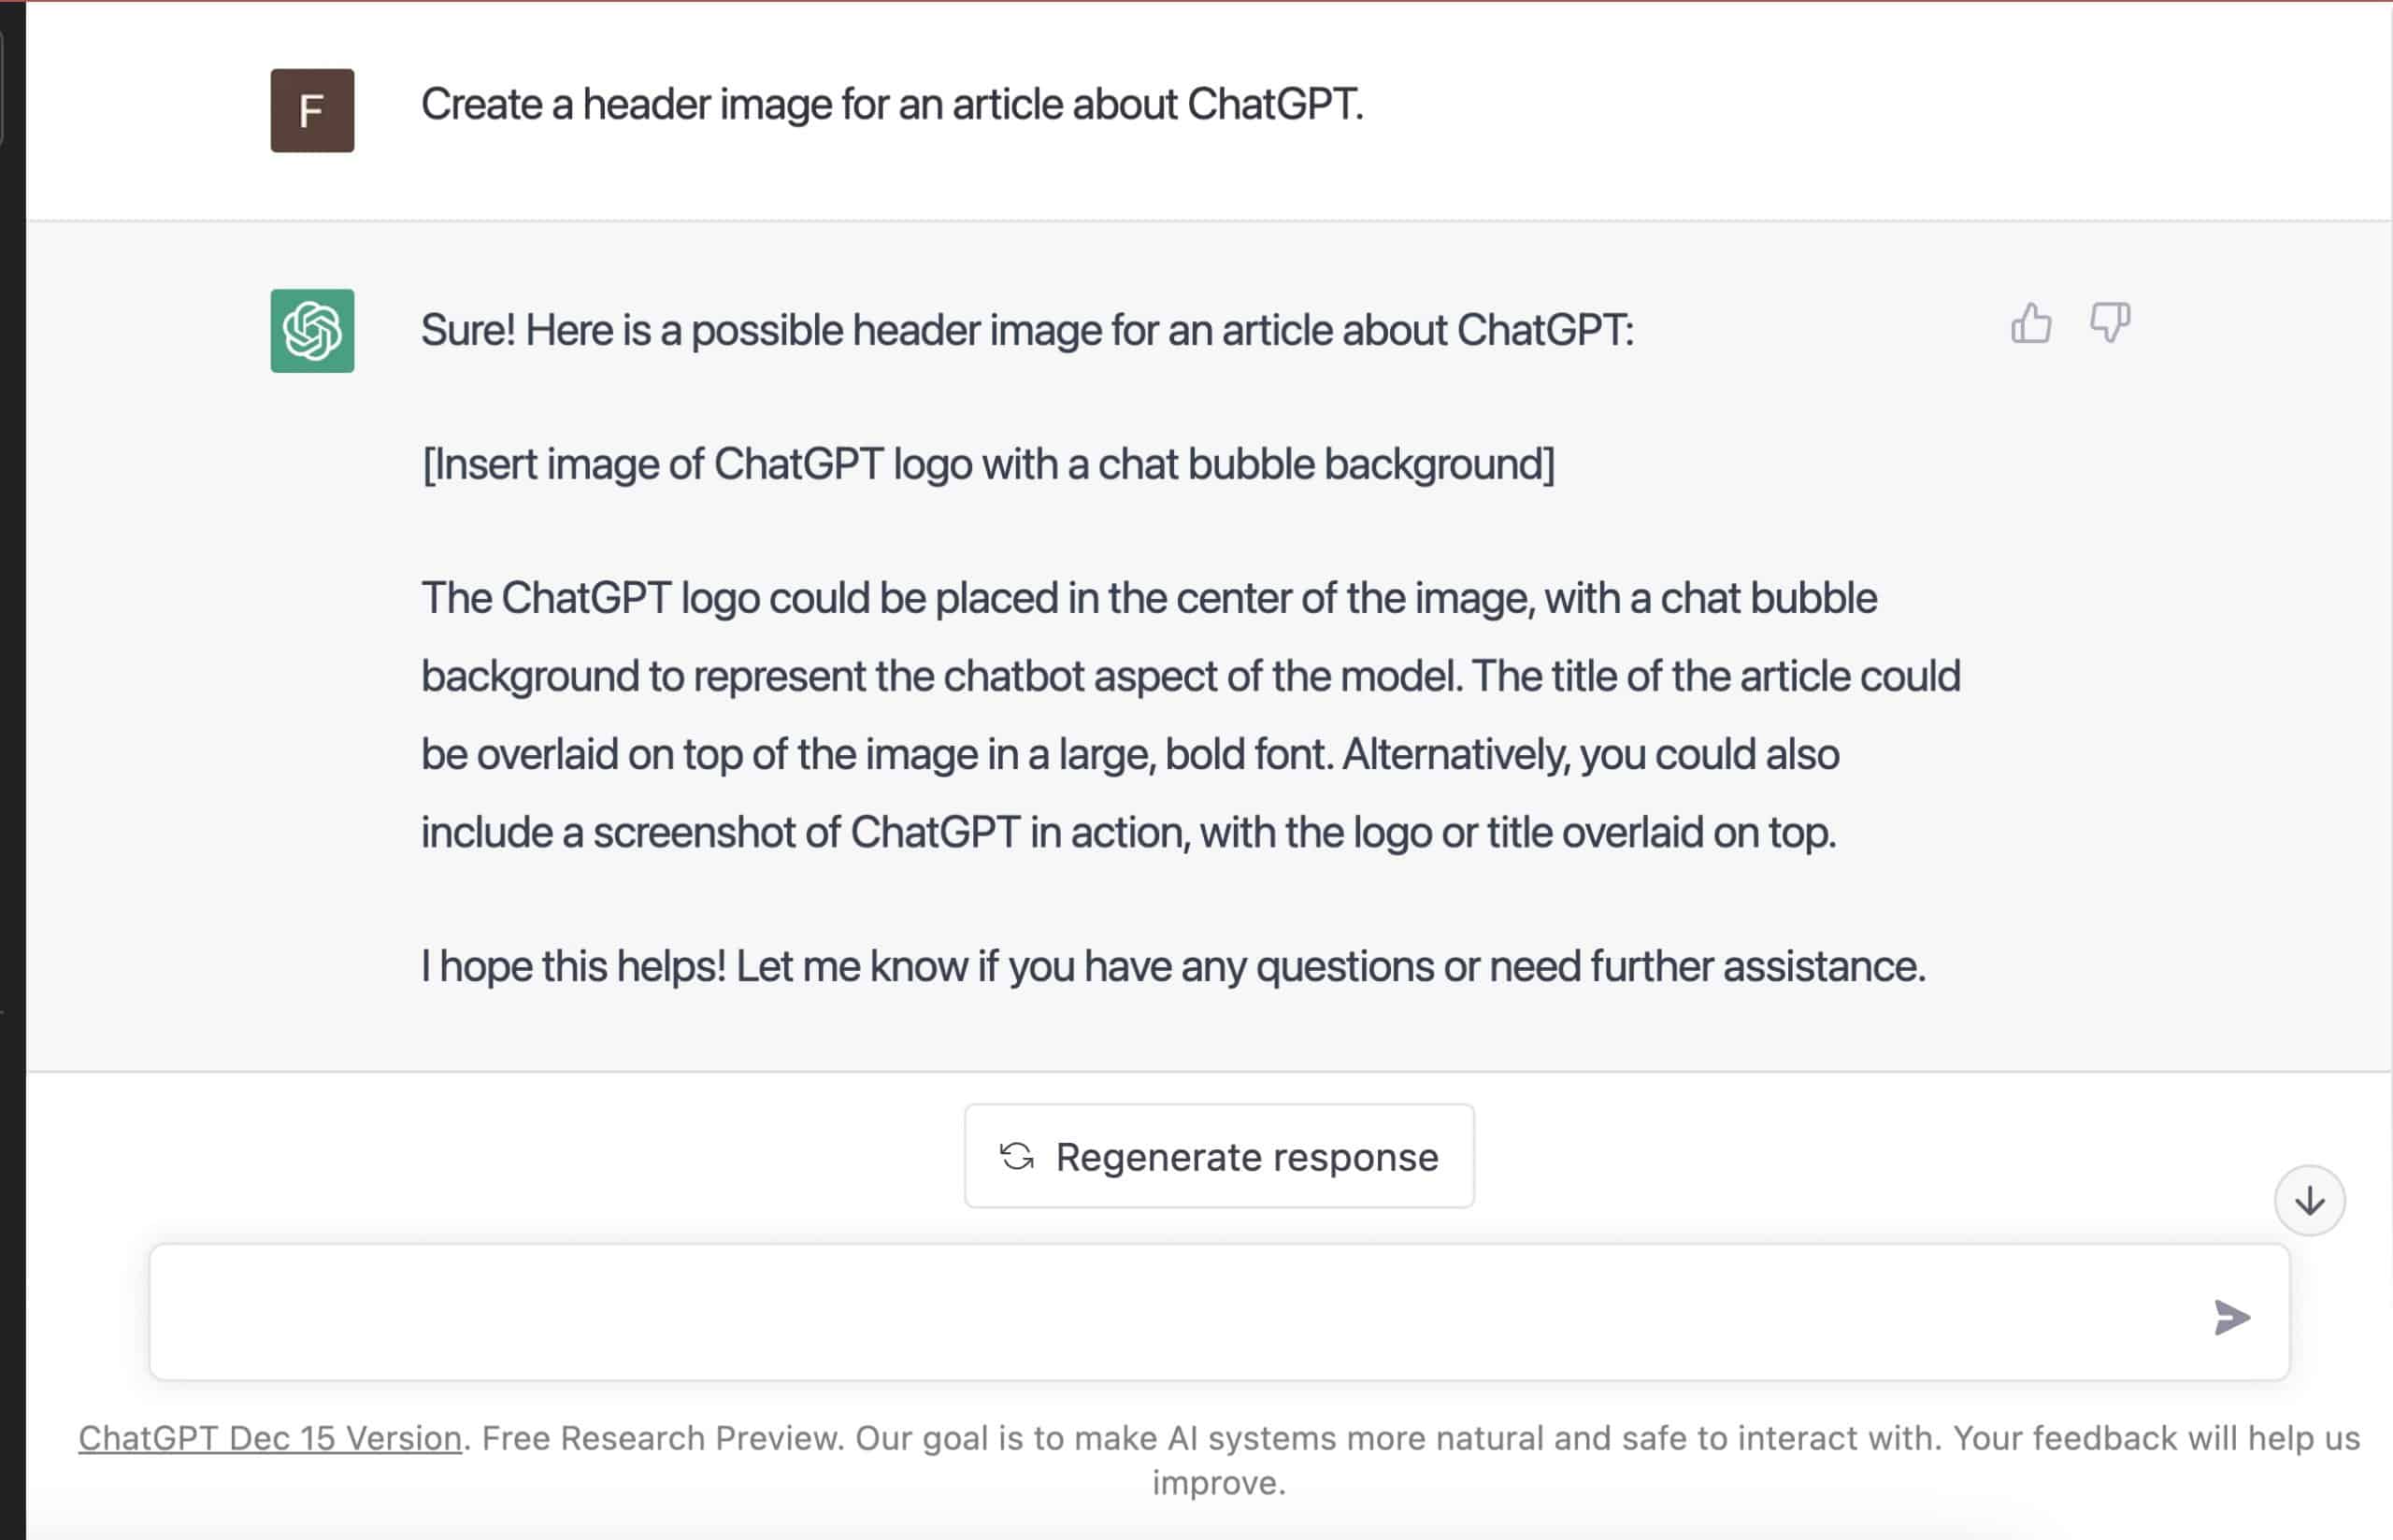 Marketing Roundup: ChatGPT Takes Internet By Storm